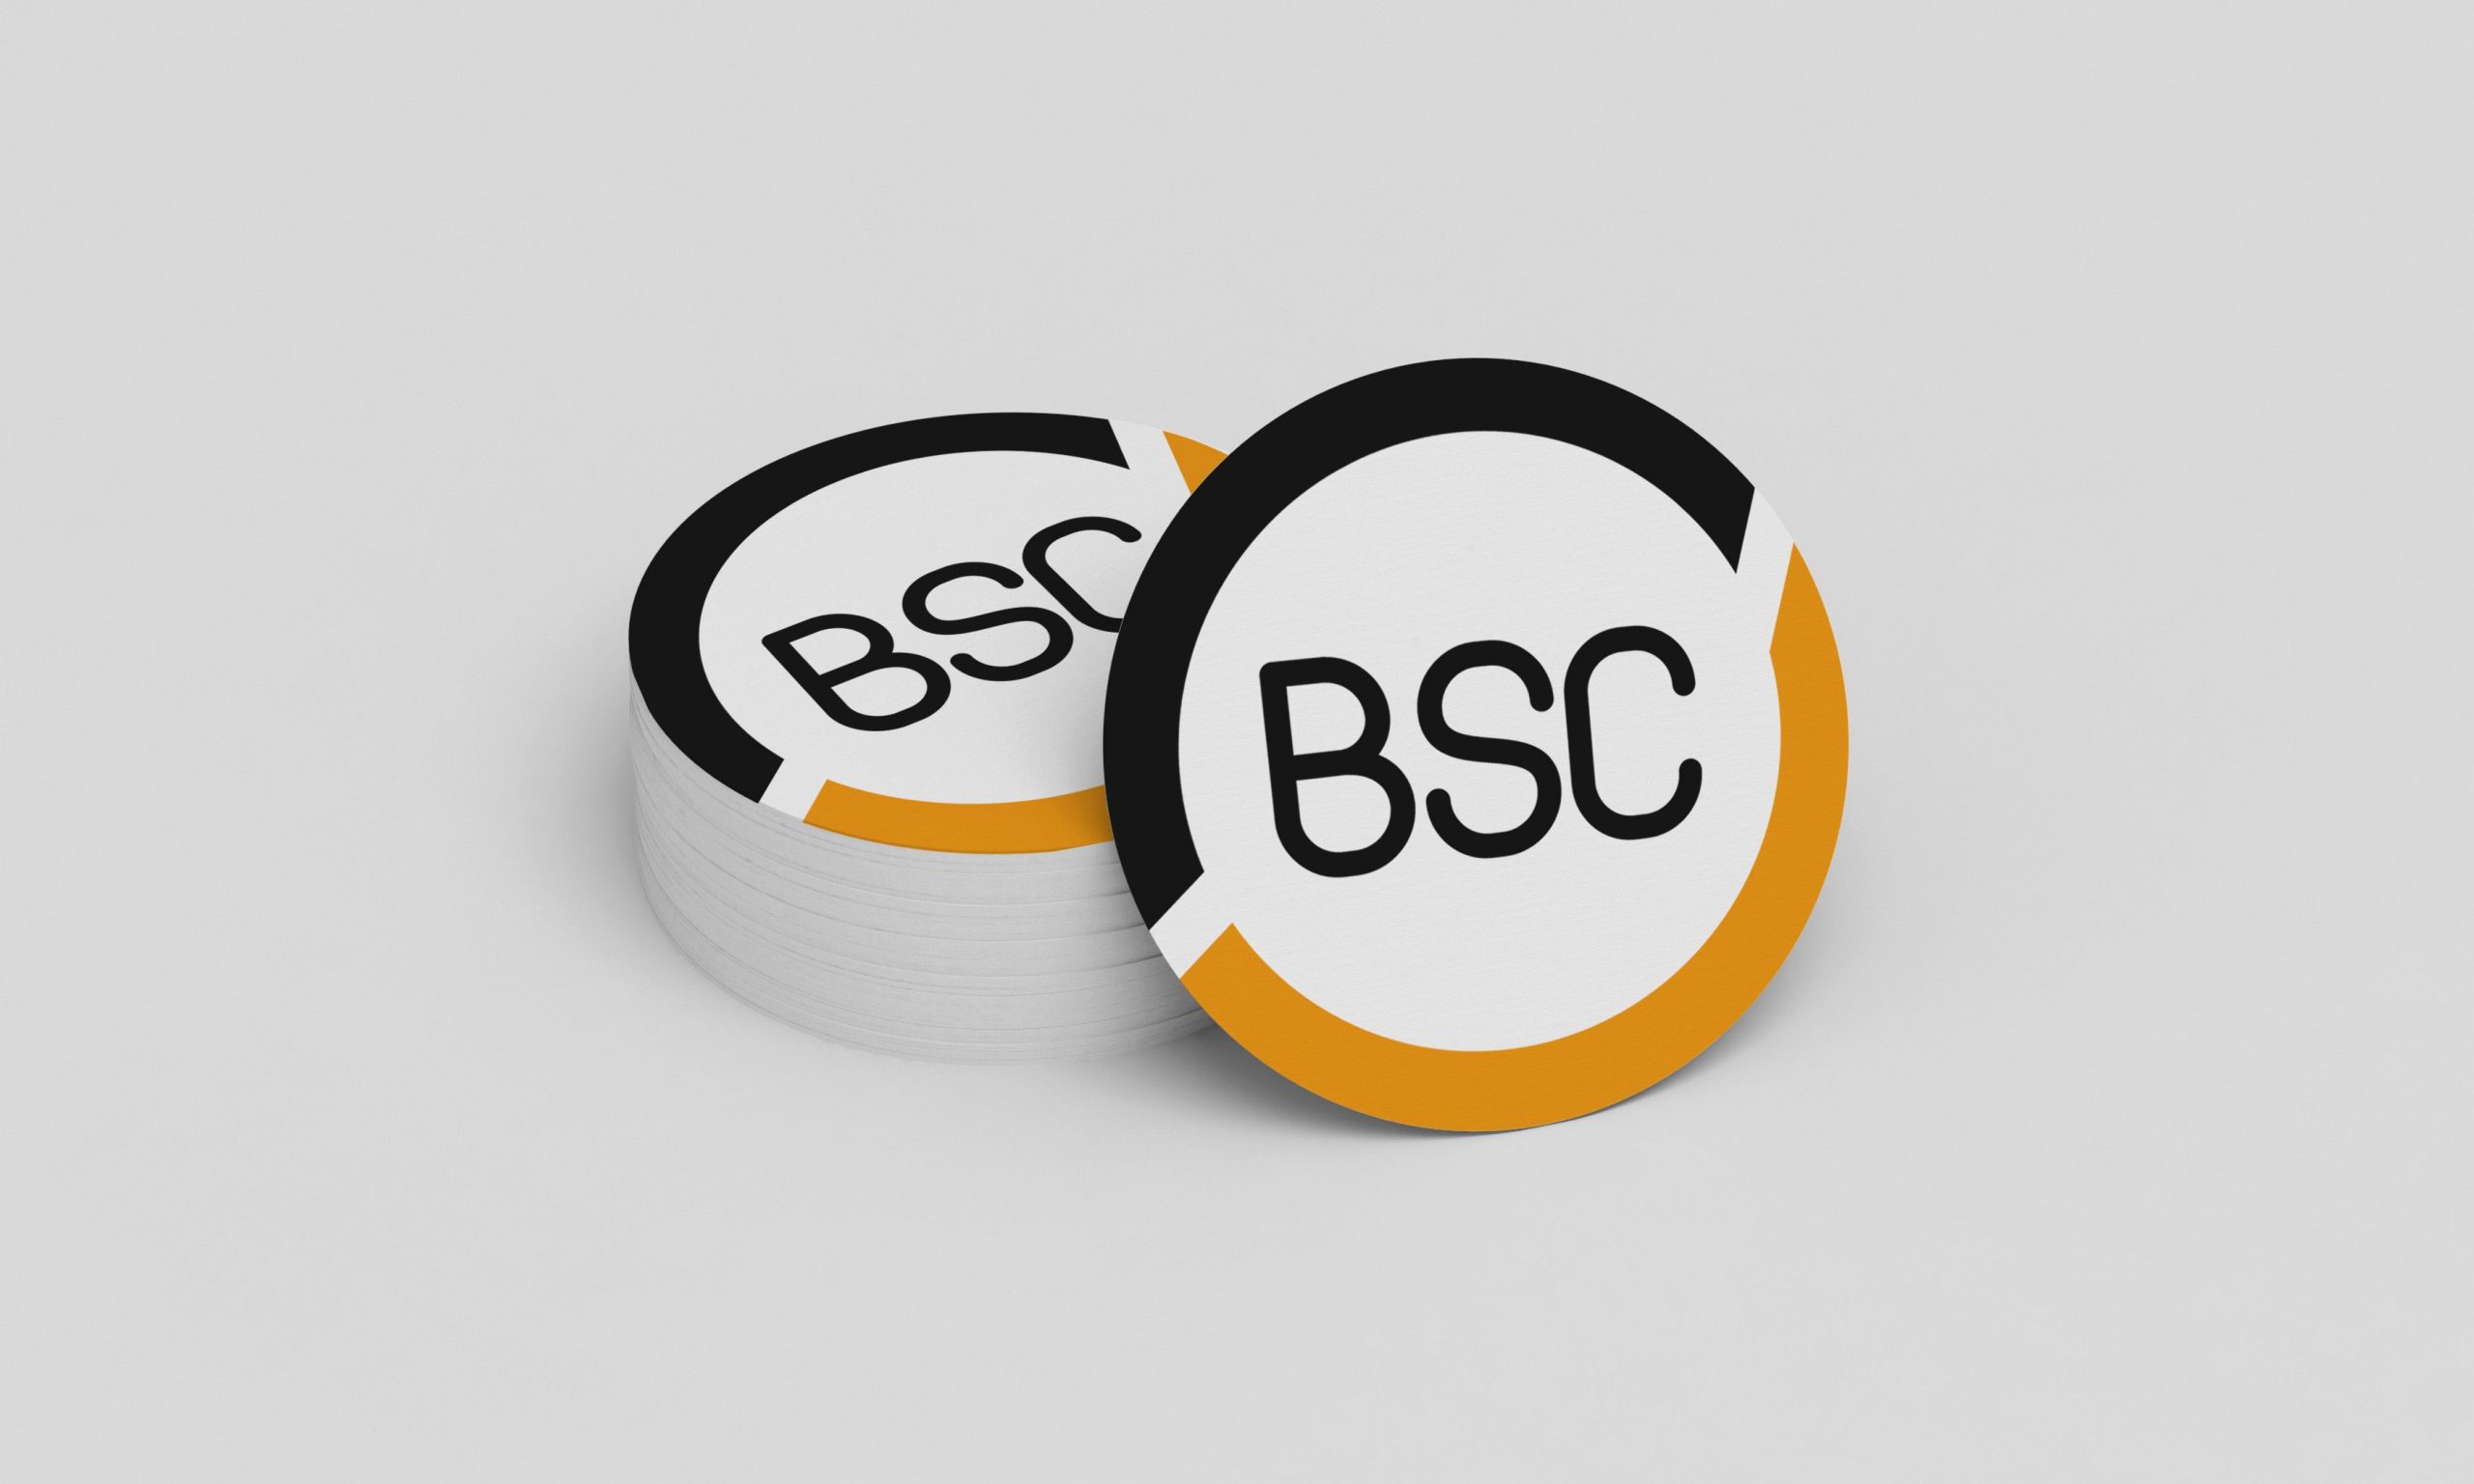 does crypto.com support bsc network